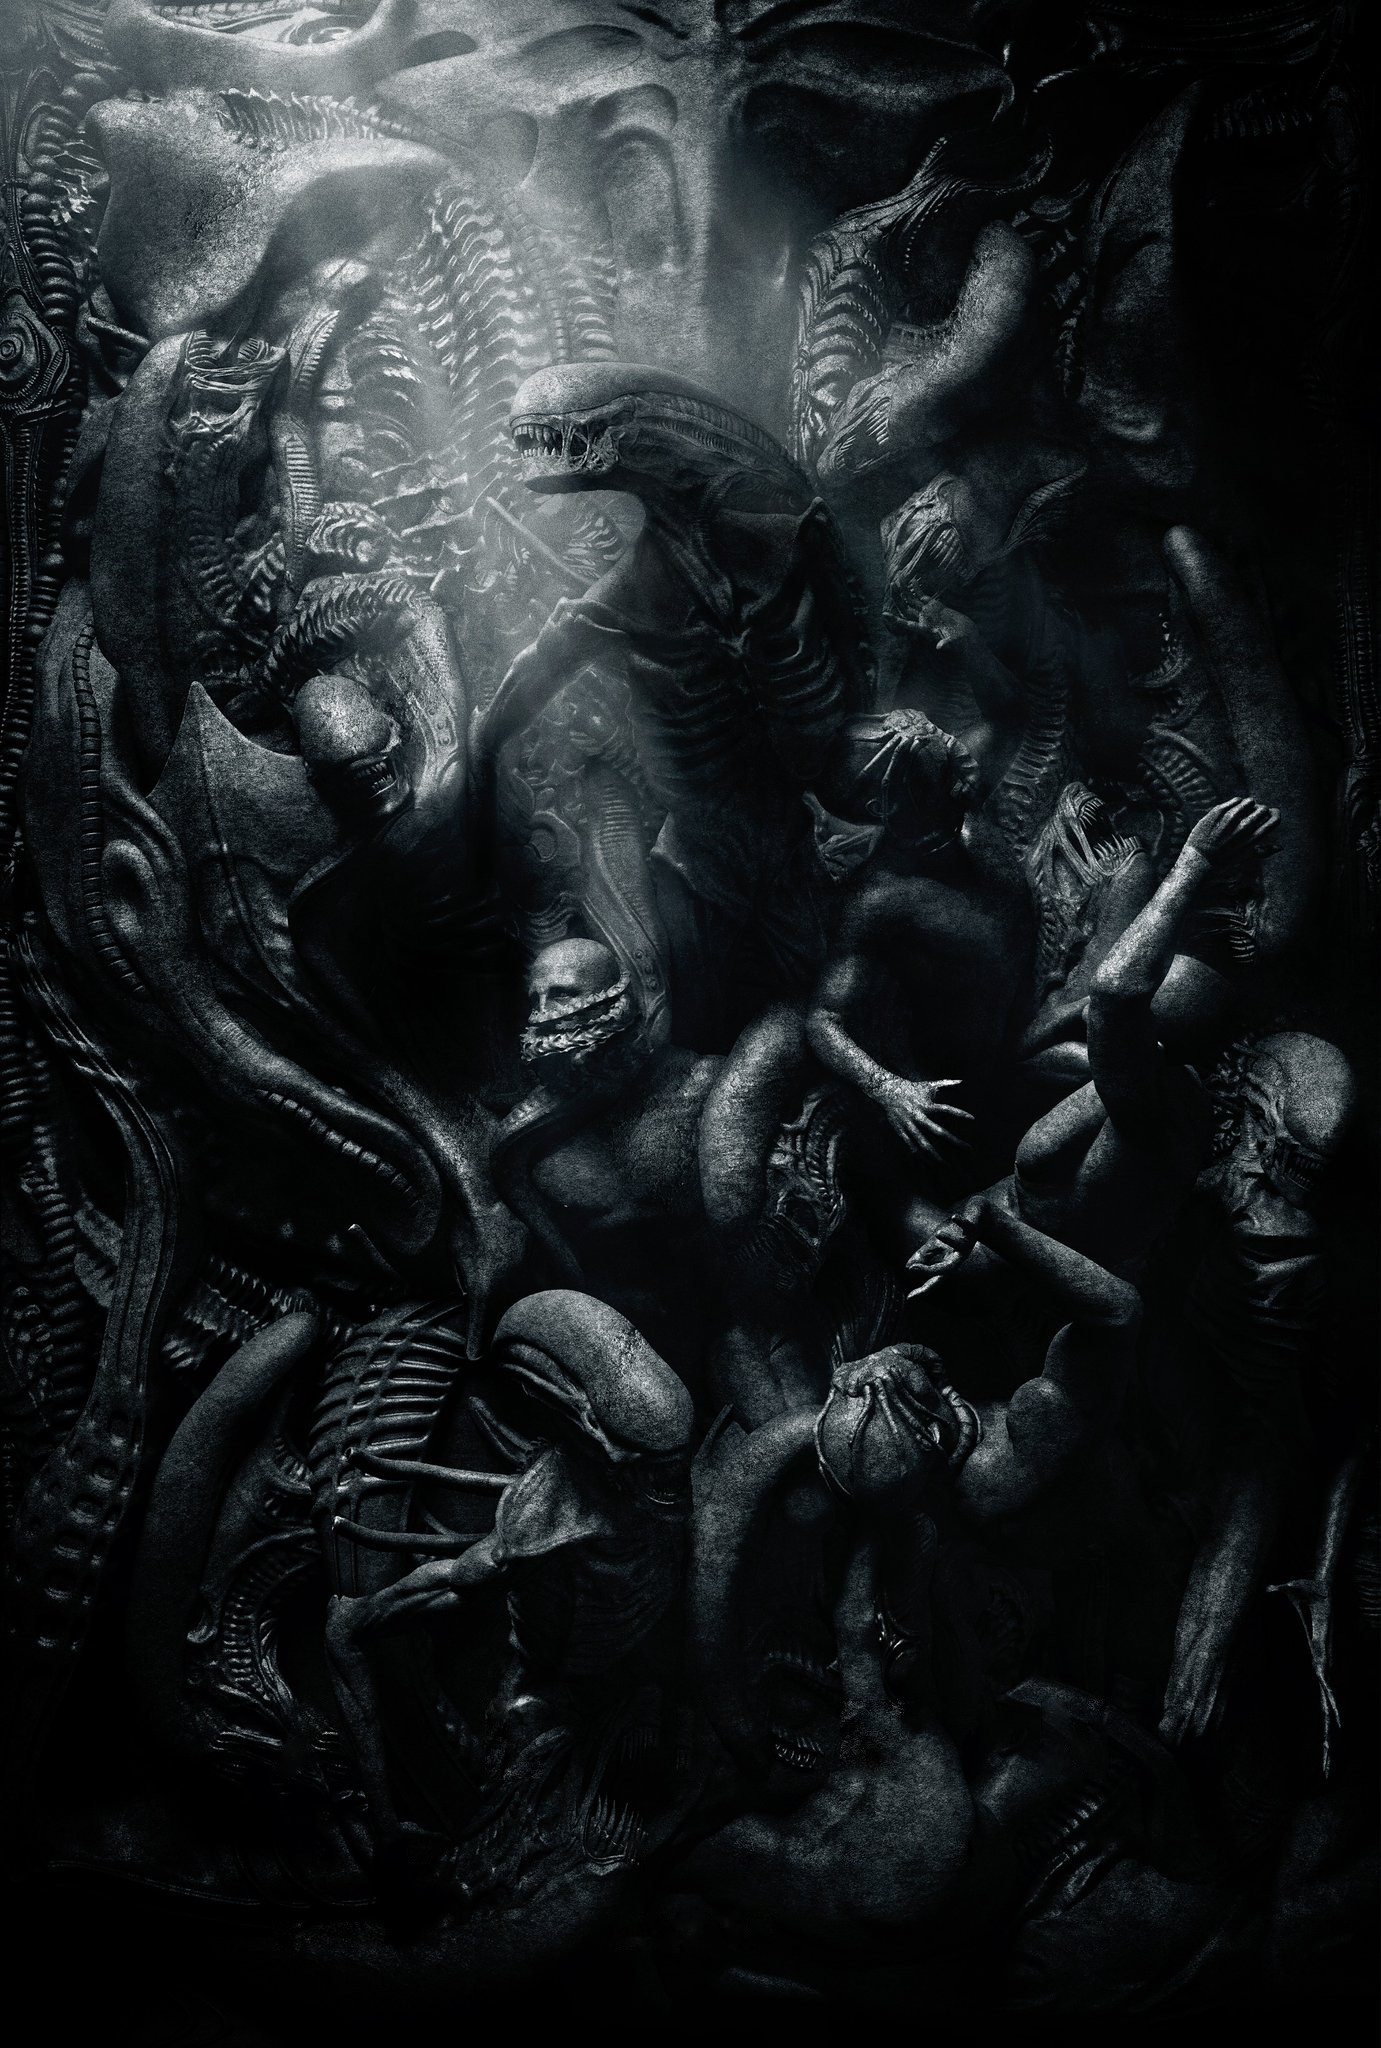 From Alien and Prometheus director Ridley Scott, the film opens on May 19 via Fox